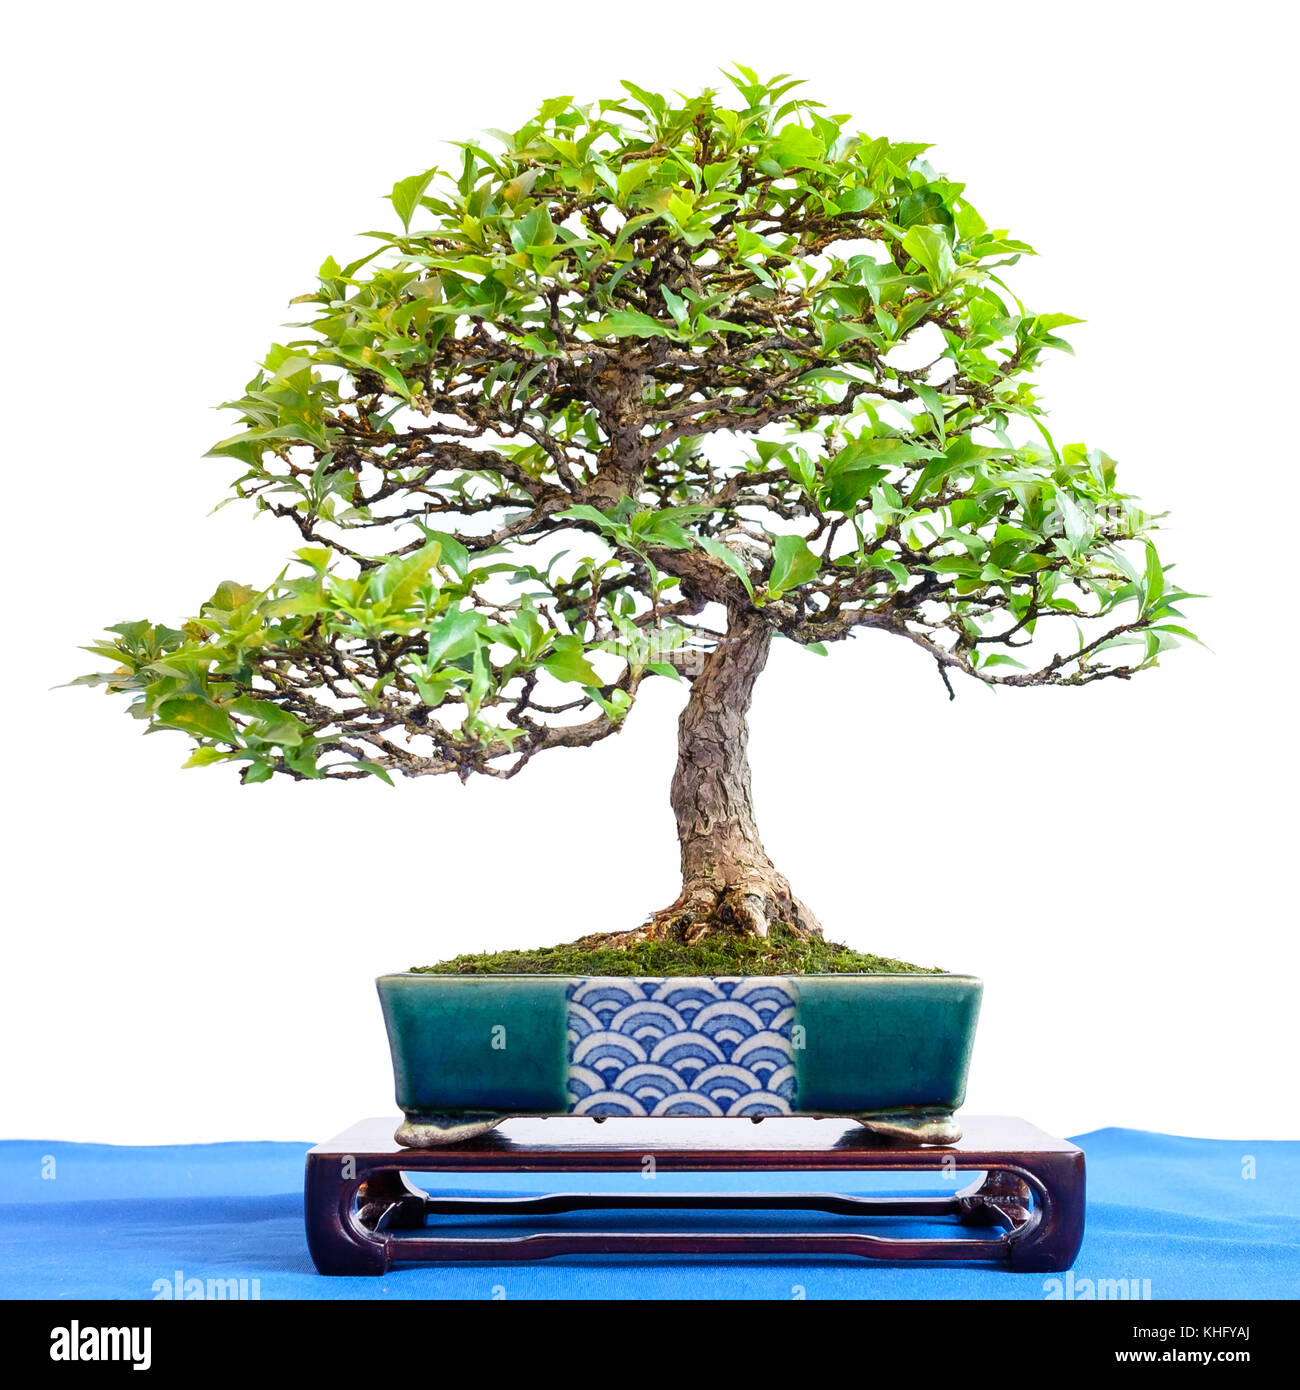 Premna bonsai tree from a mint family in a little pot Stock Photo